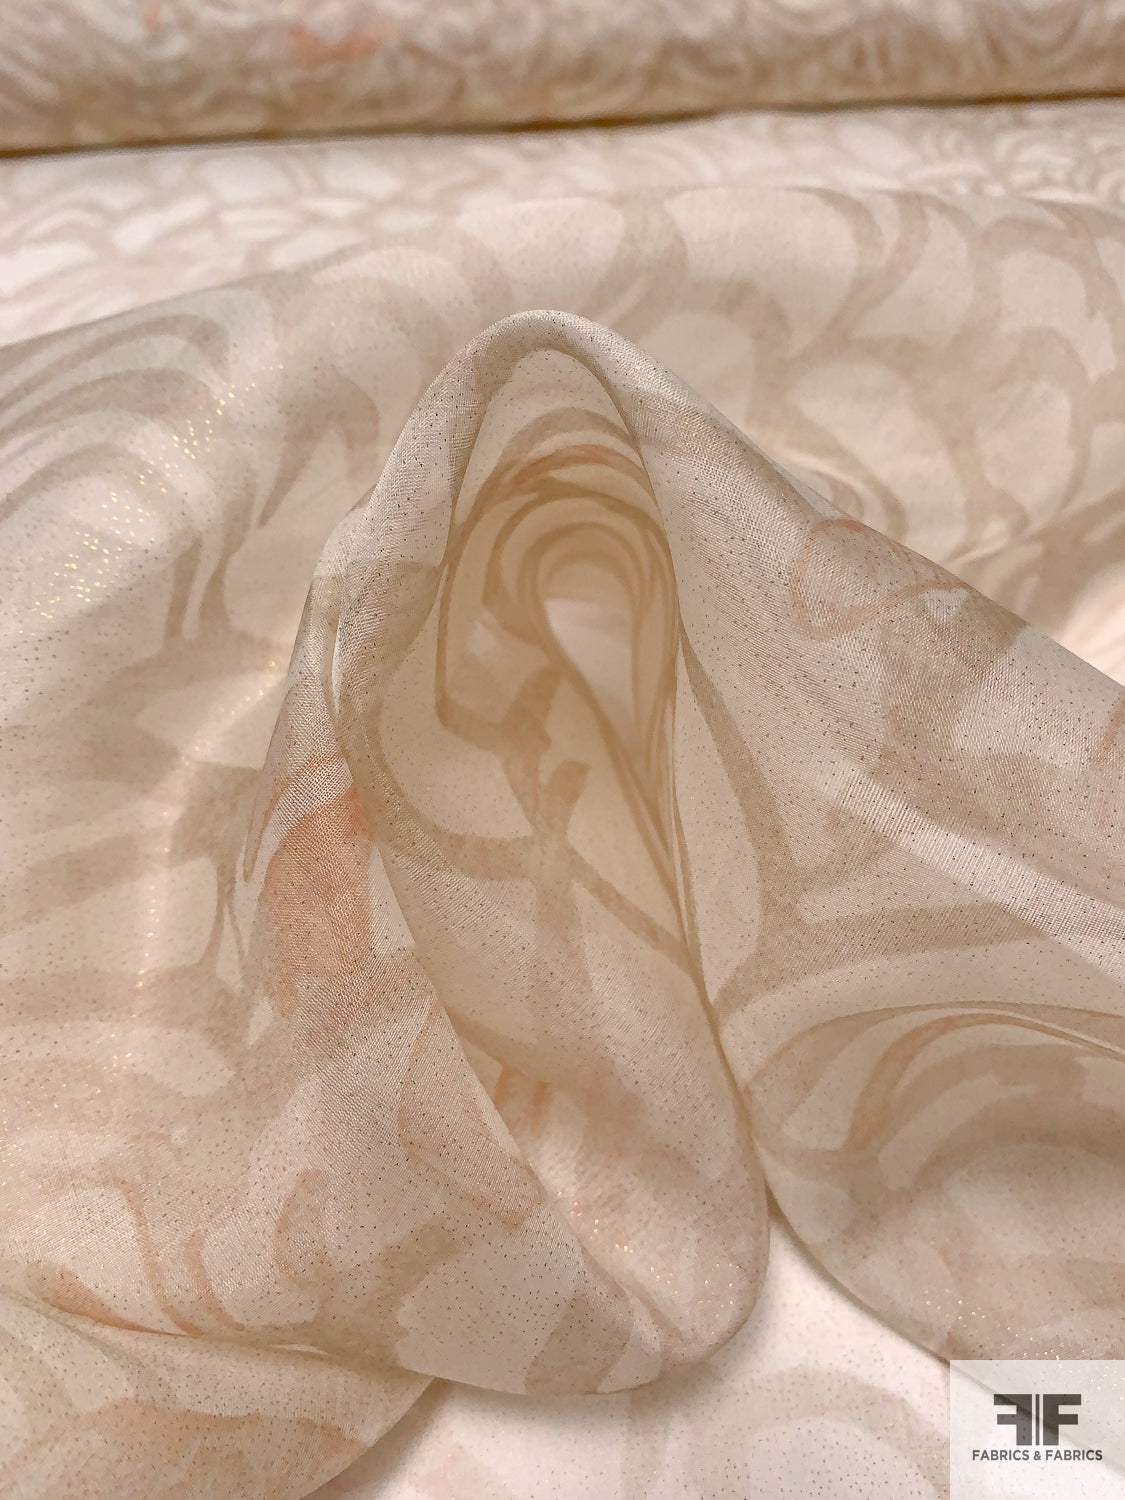 Painterly Hills Printed Silk Organza with Speckly Foil Print - Tan  Mist/Ivory/Gold